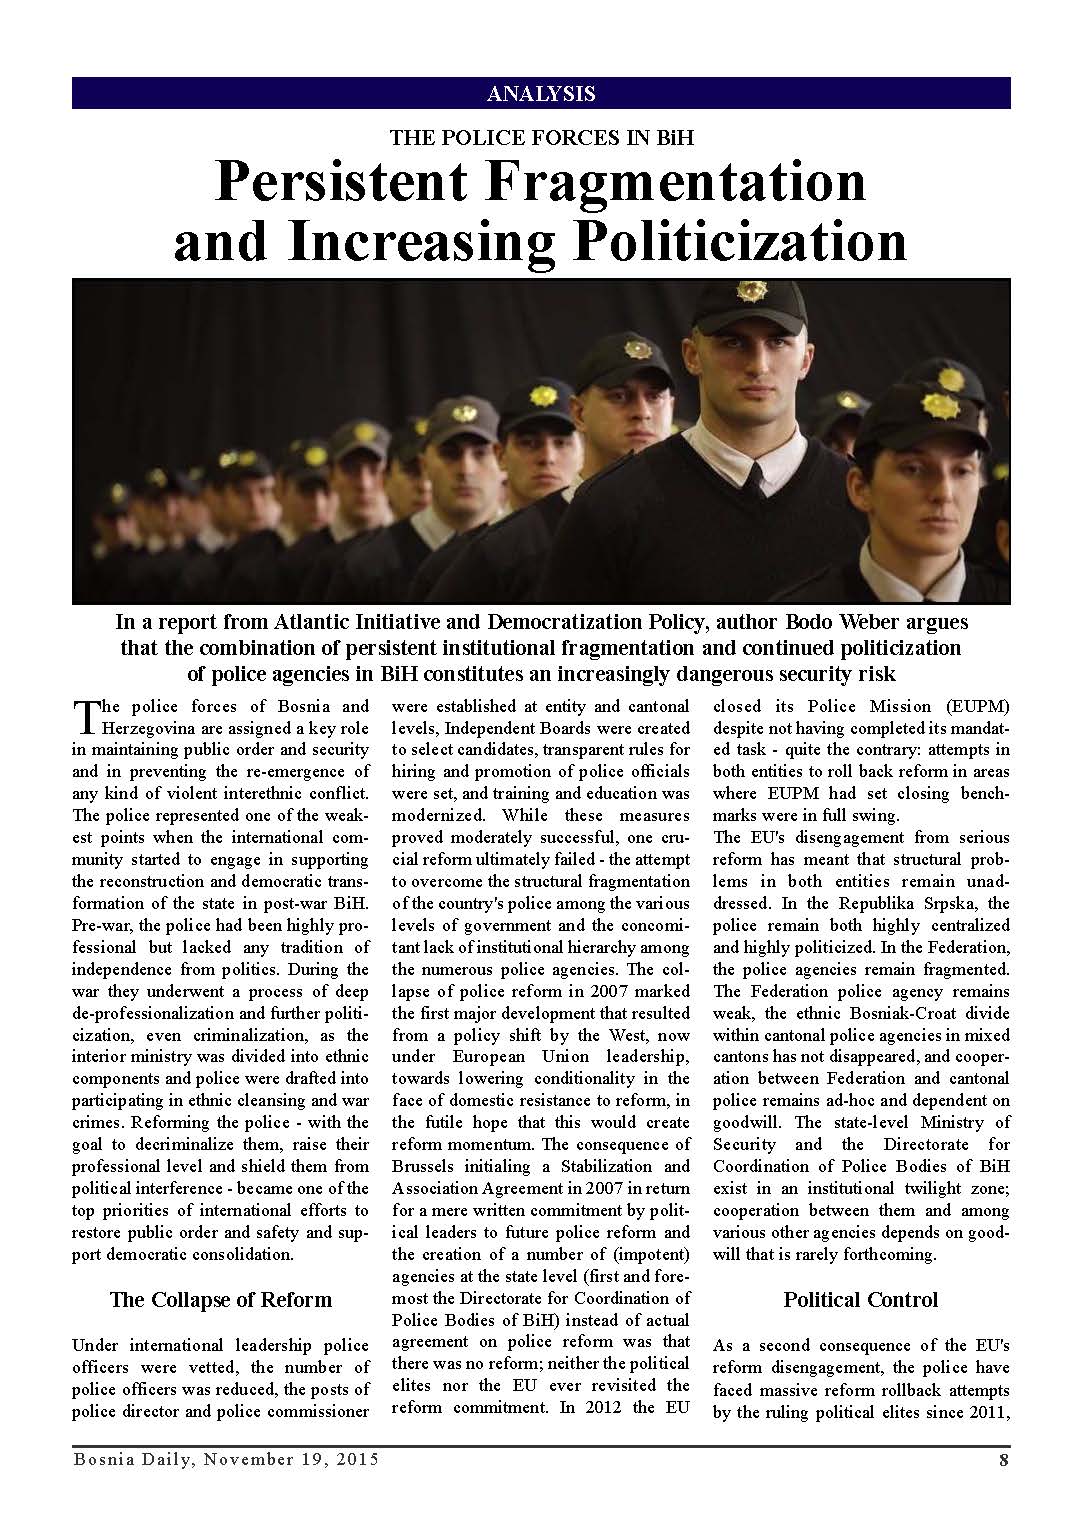 DPC BOSNIA DAILY: The Police Forces In BiH. Persistent Fragmentation and Increasing Politicization Cover Image